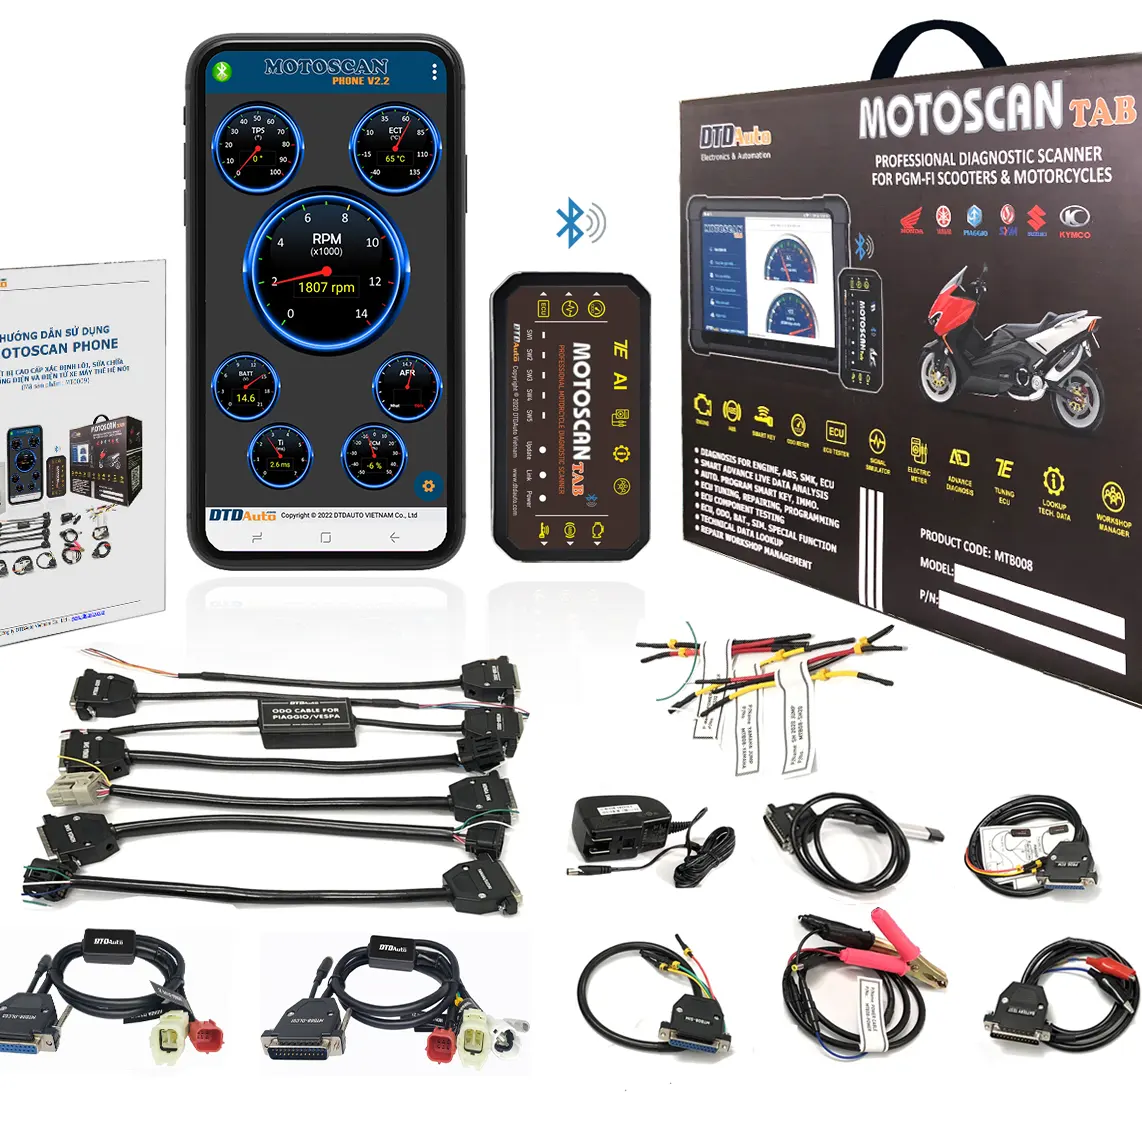 DTDAUTO MOTOSCAN PHONE - Tool Find Fault Do Not Show OBD Codes Key Programing for SUZUKI, YAMAHA Read Faults Codes Stored in ECM